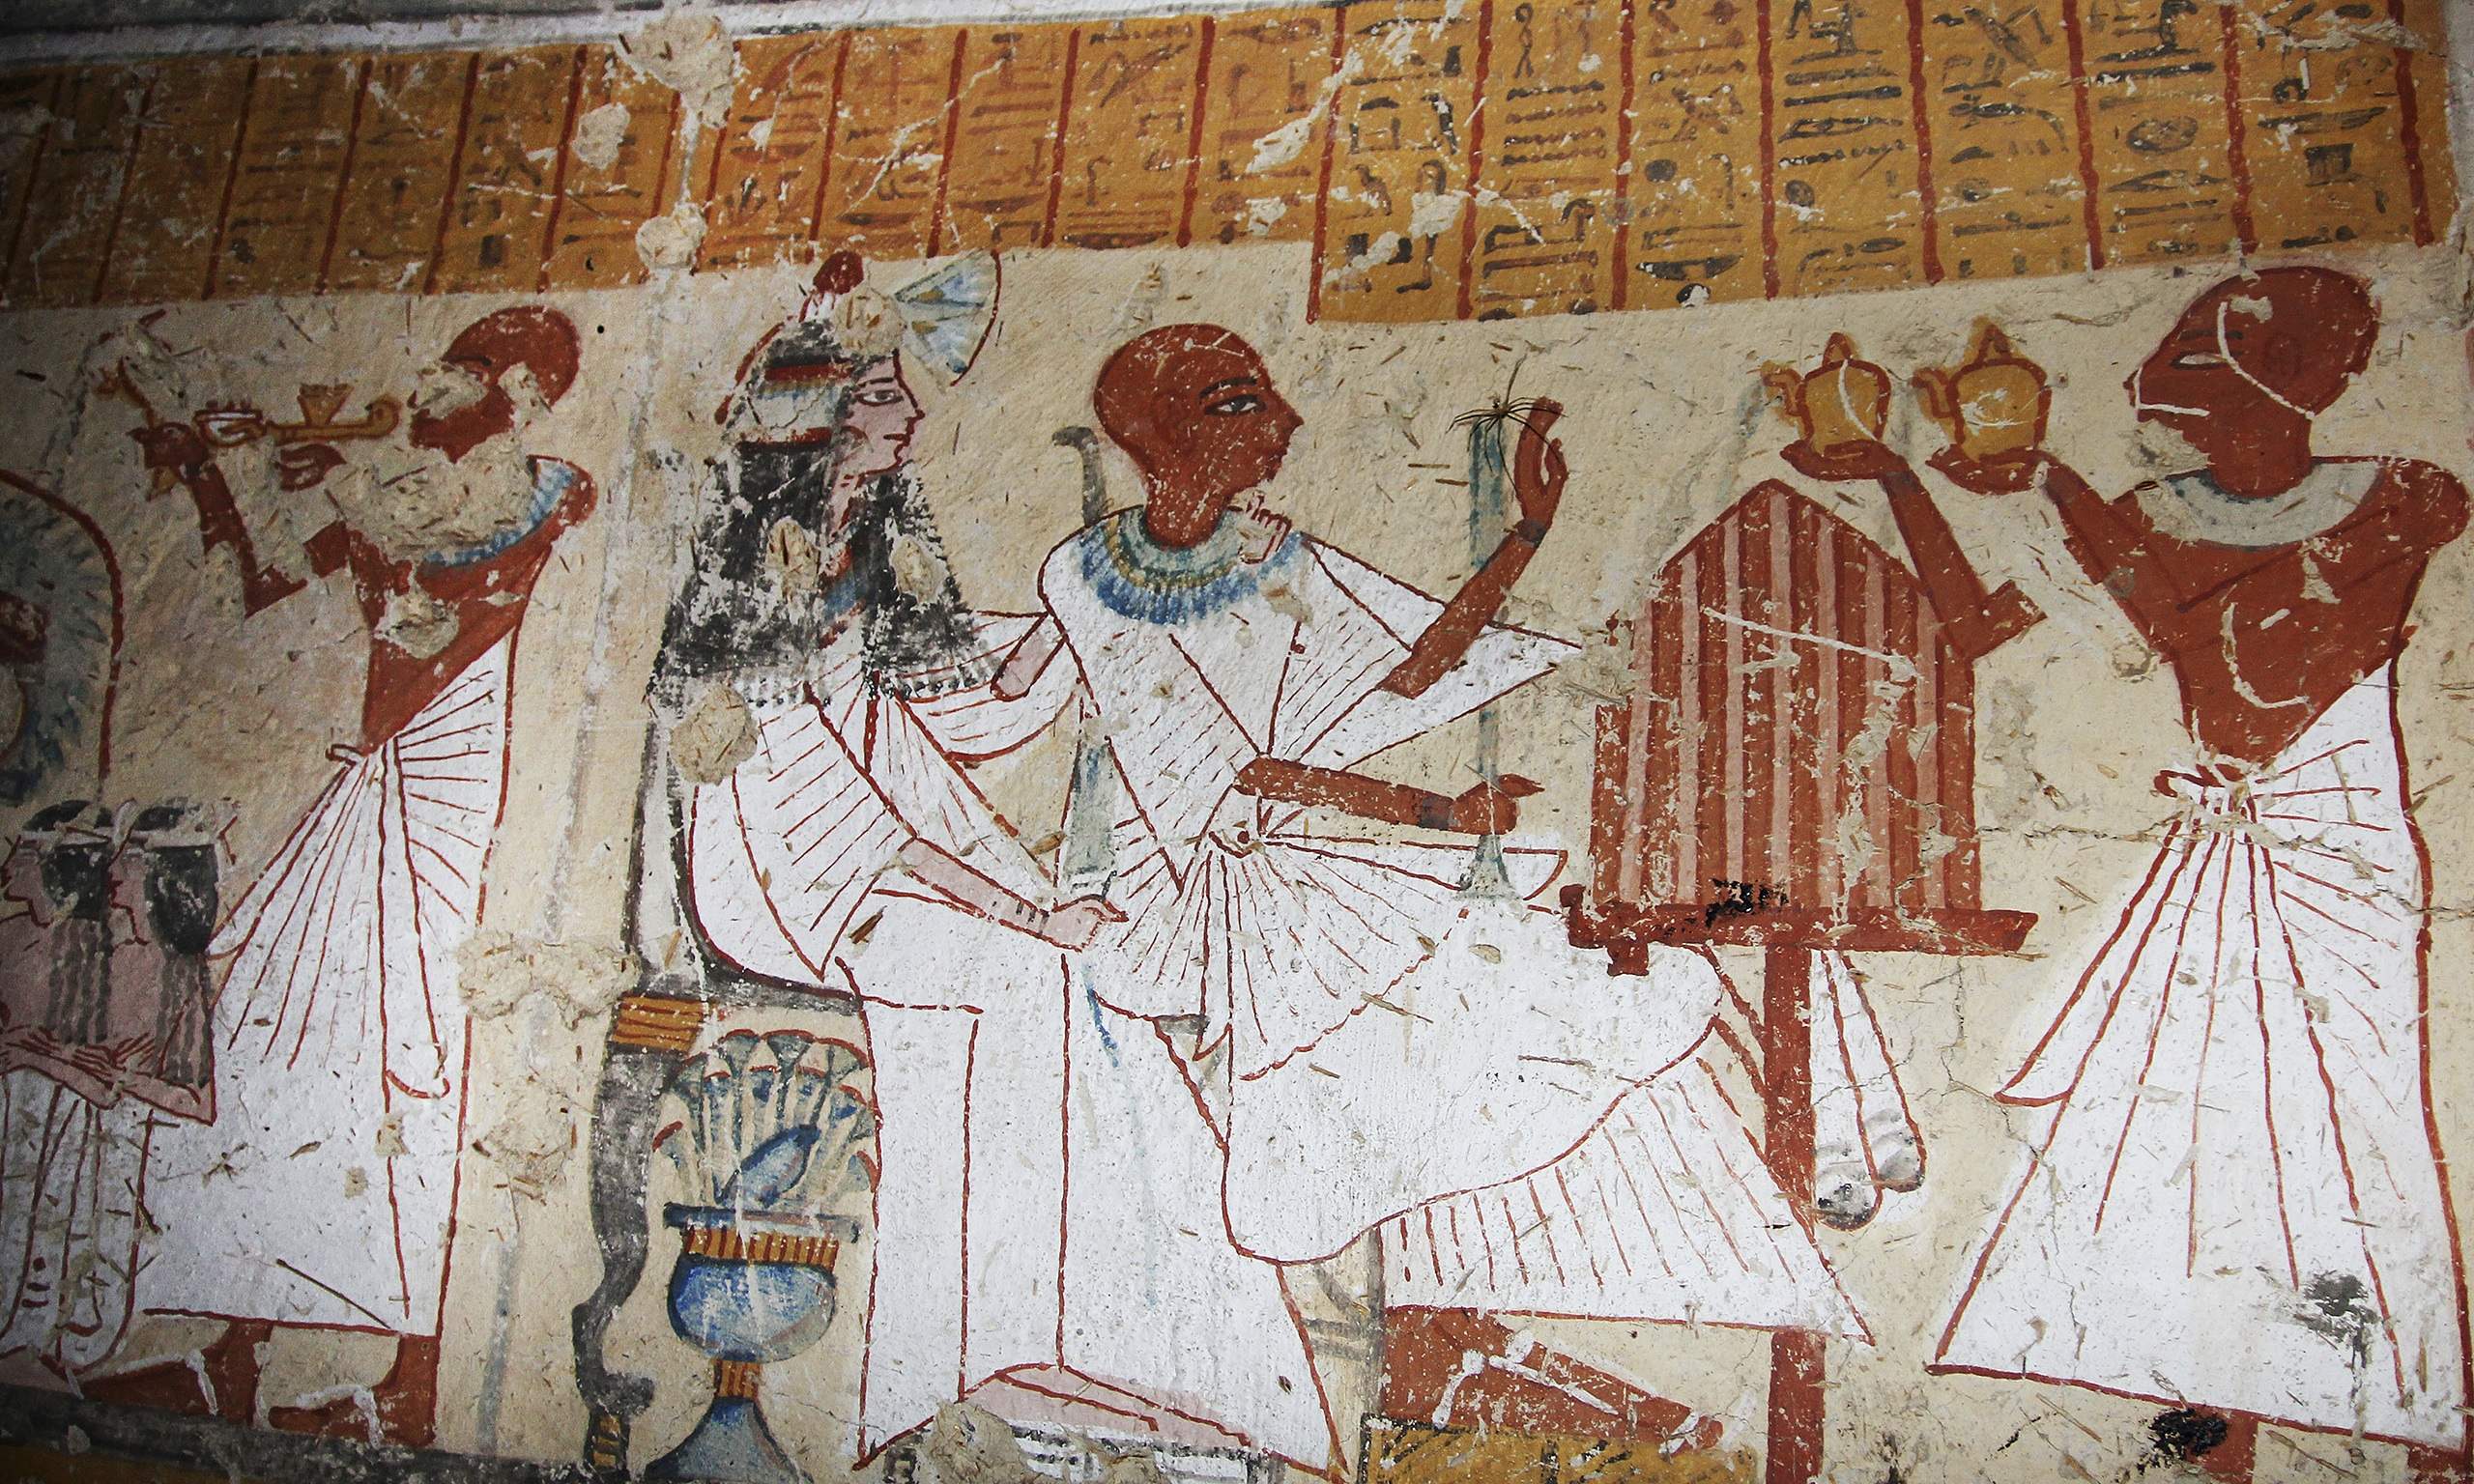 Scenes from ancient Egypt found on the walls of a newly discovered tomb in Luxor.